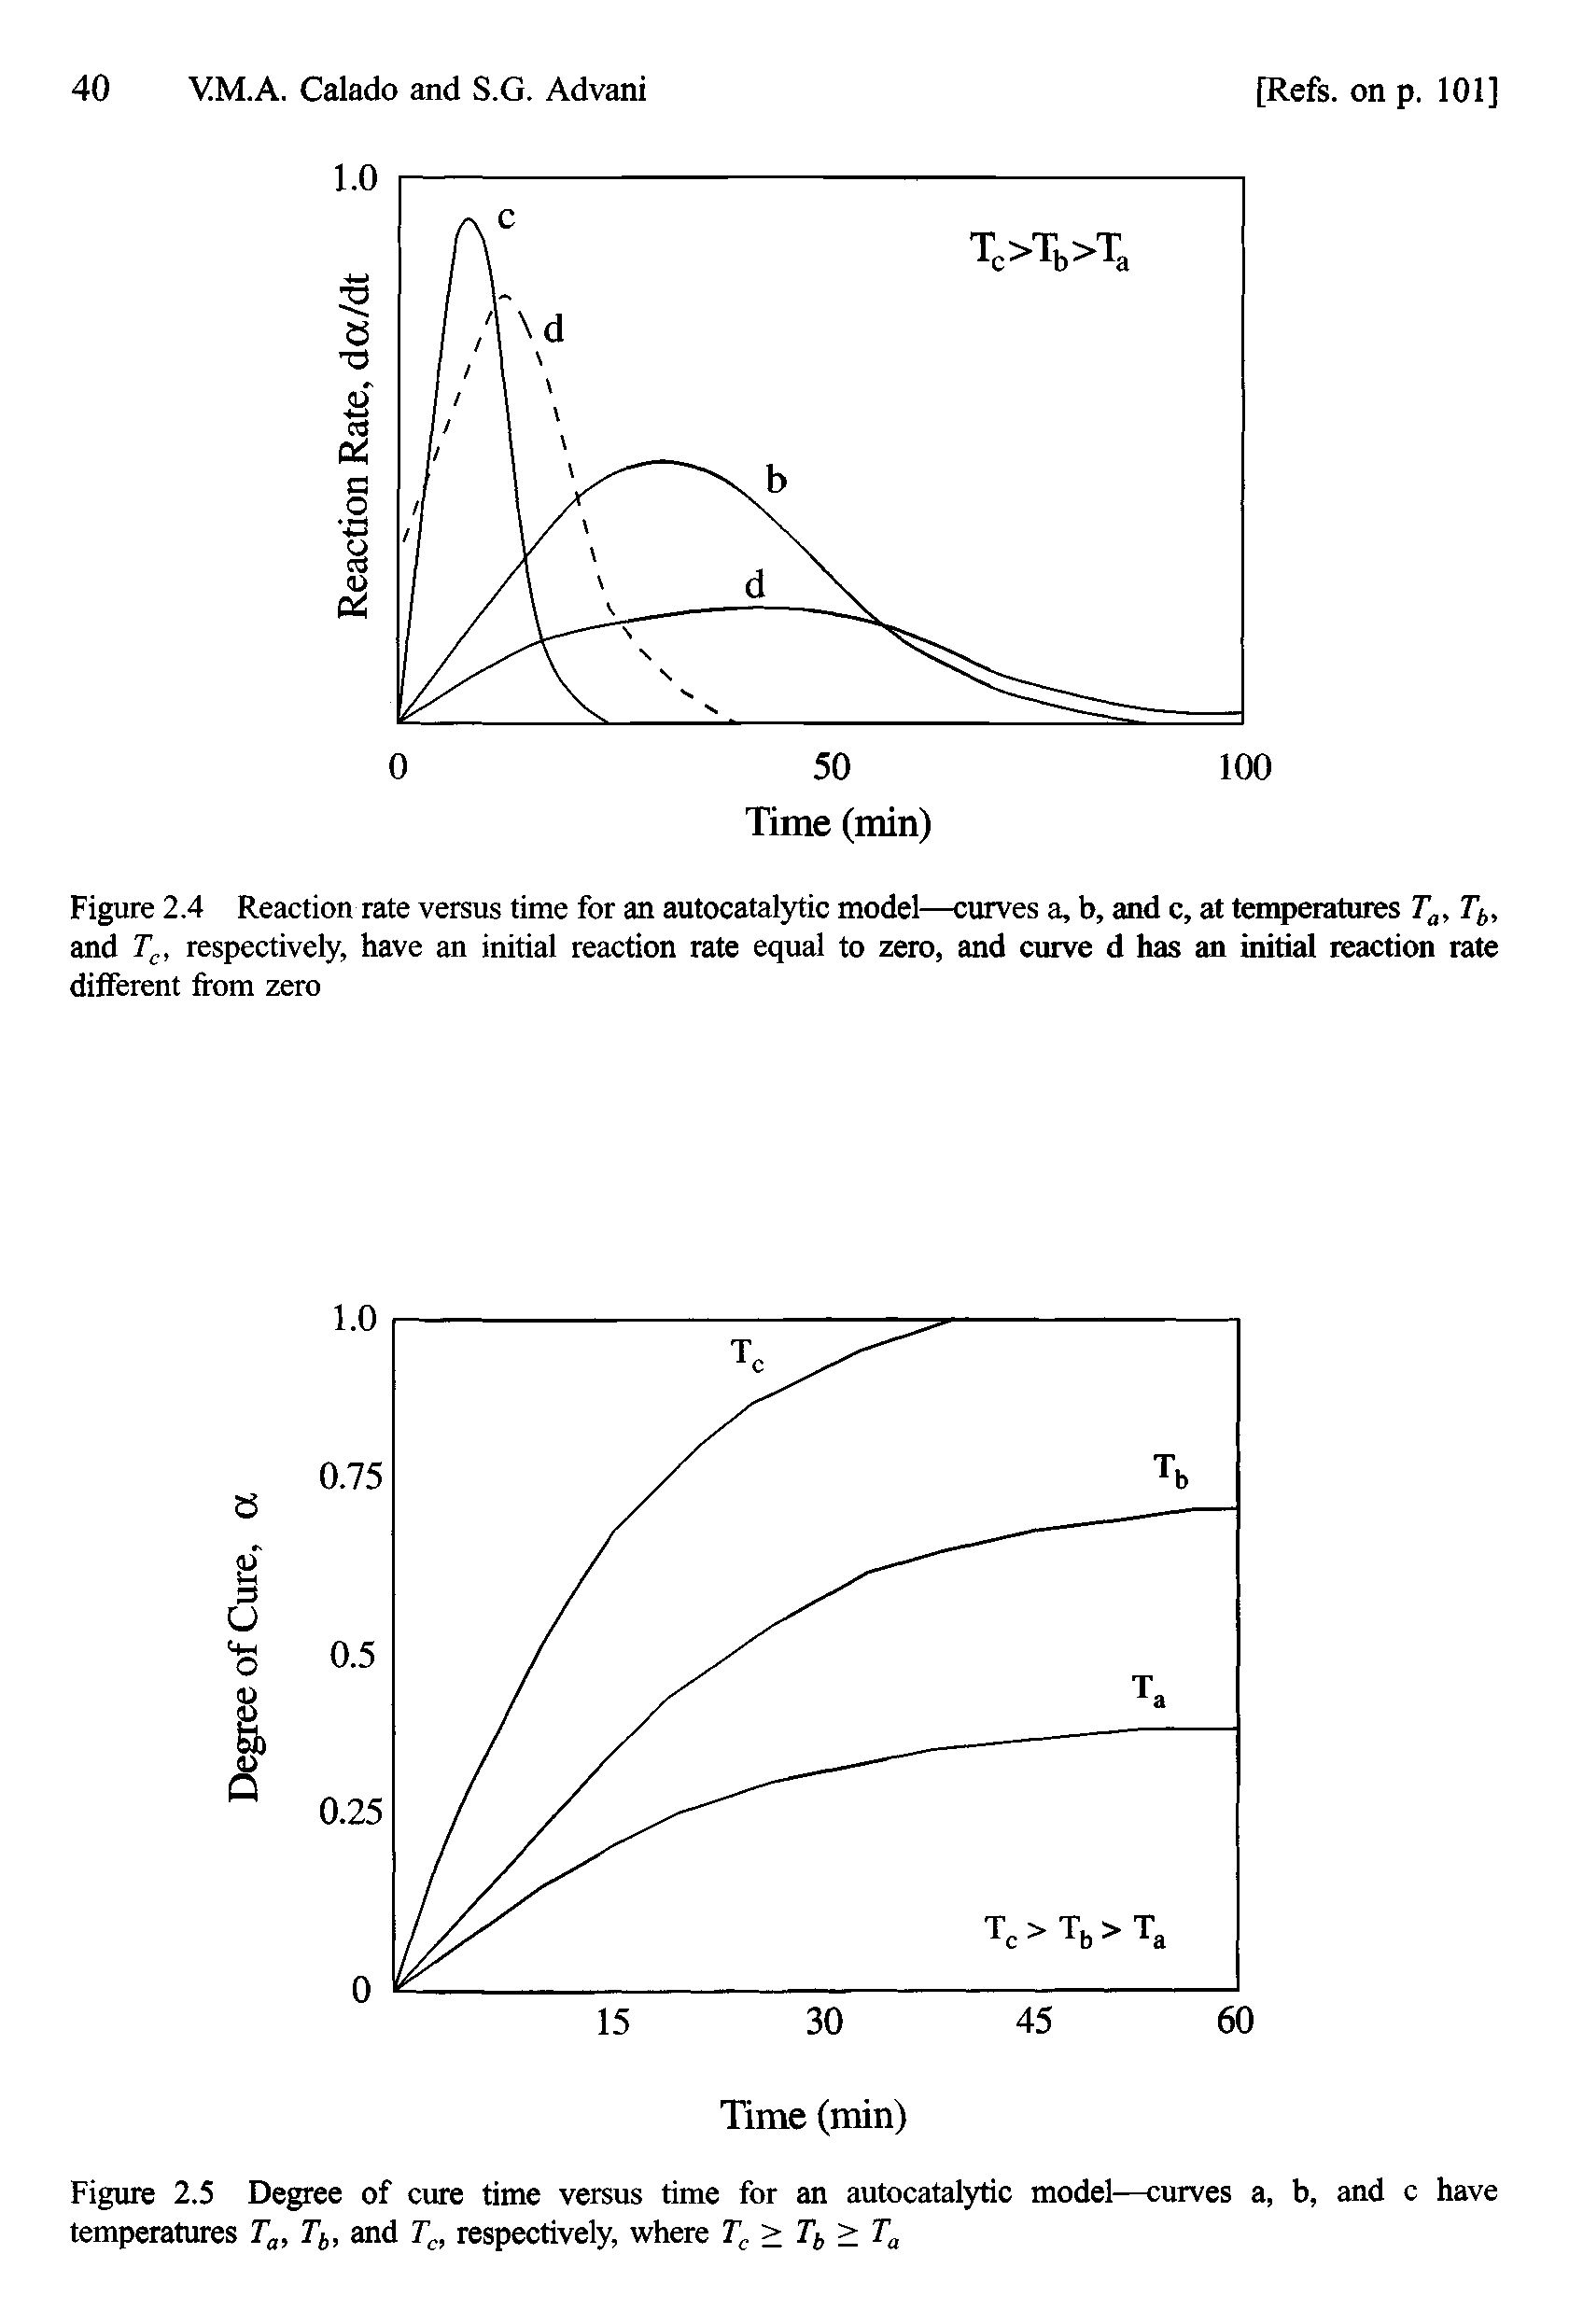 Figure 2.5 Degree of cure time versus time for an autocatalytic model—curves a, b, and c have temperatures Ta, Tb, and Tc, respectively, where Tc > Tb > Ta...